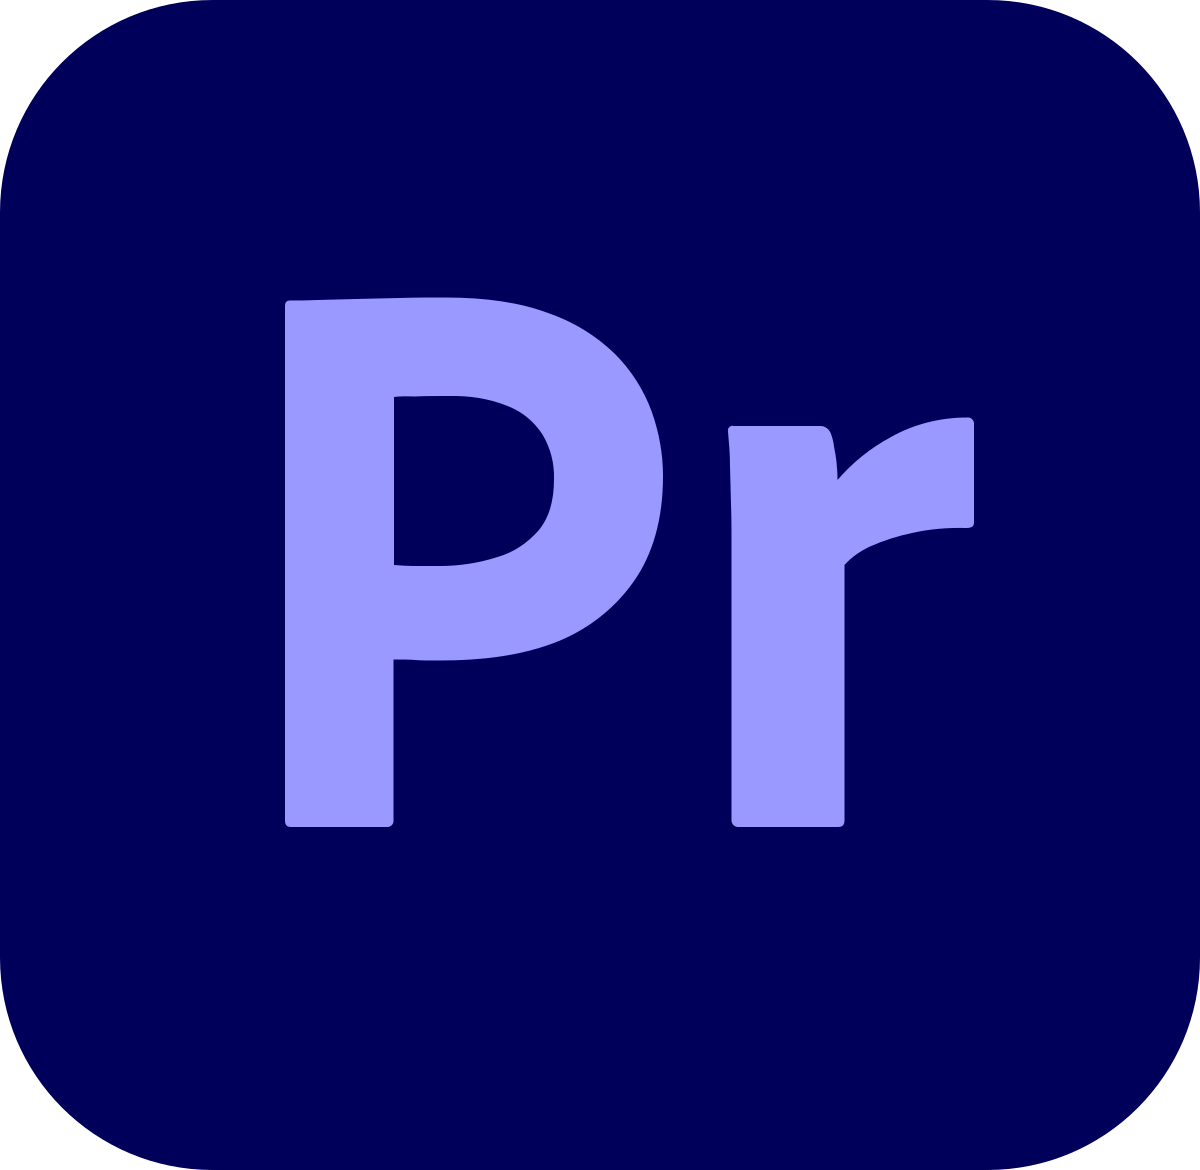 Download adobe premiere for free download windows store apps manually